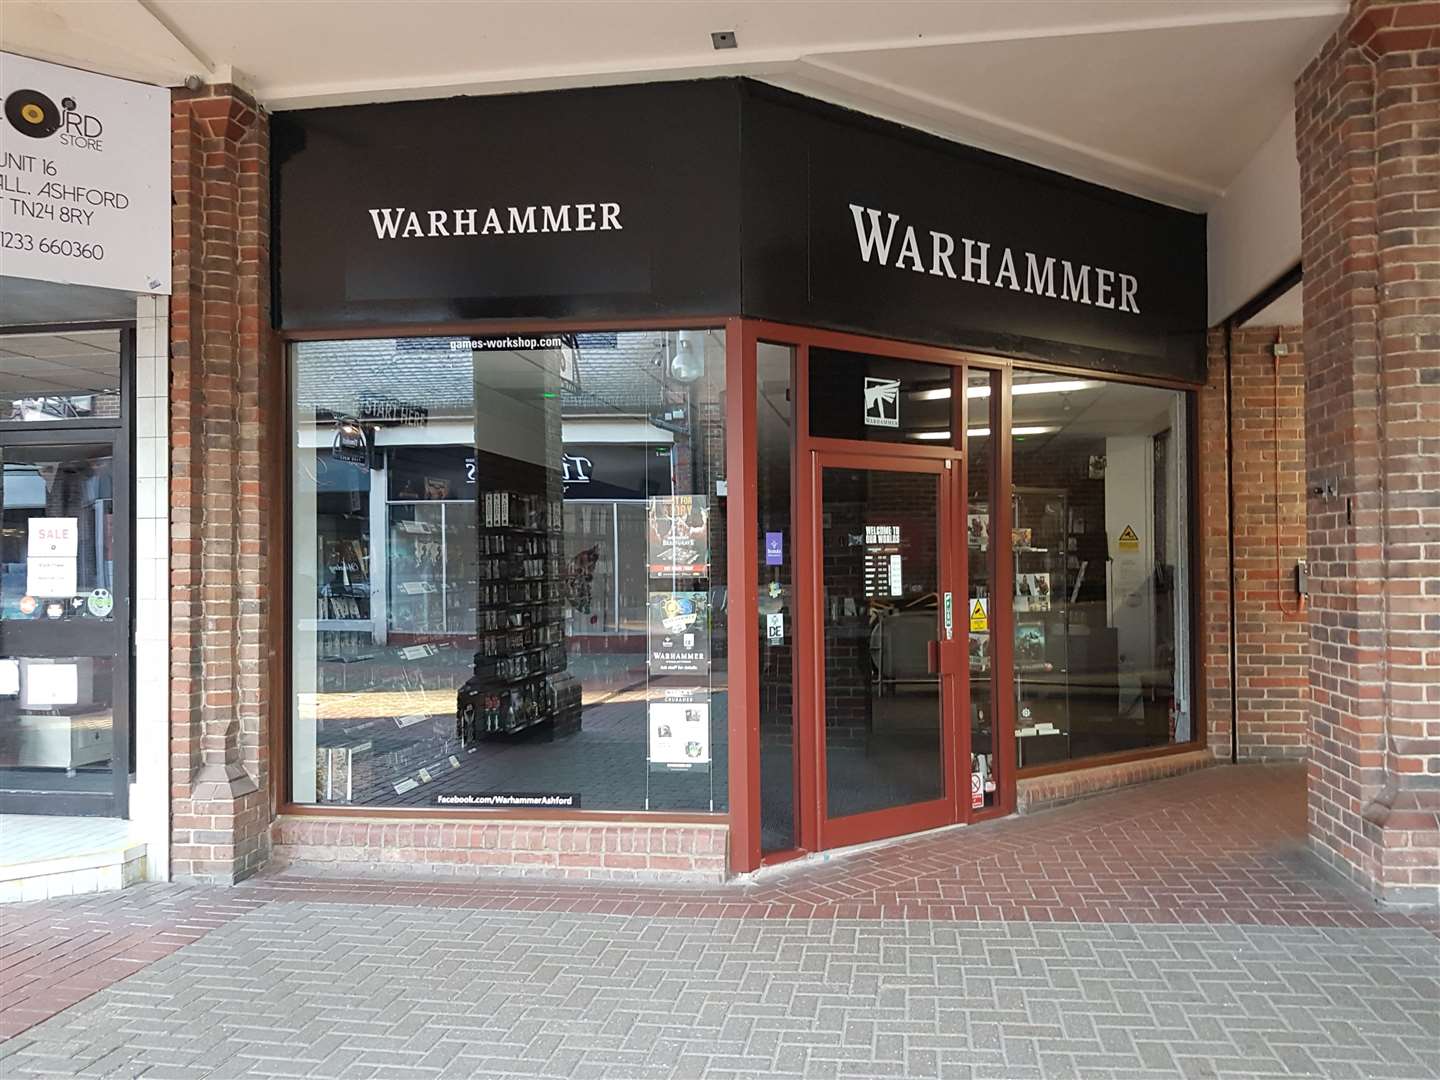 Ashford's Warhammer has reopened after being gutted by fire in September (21985689)